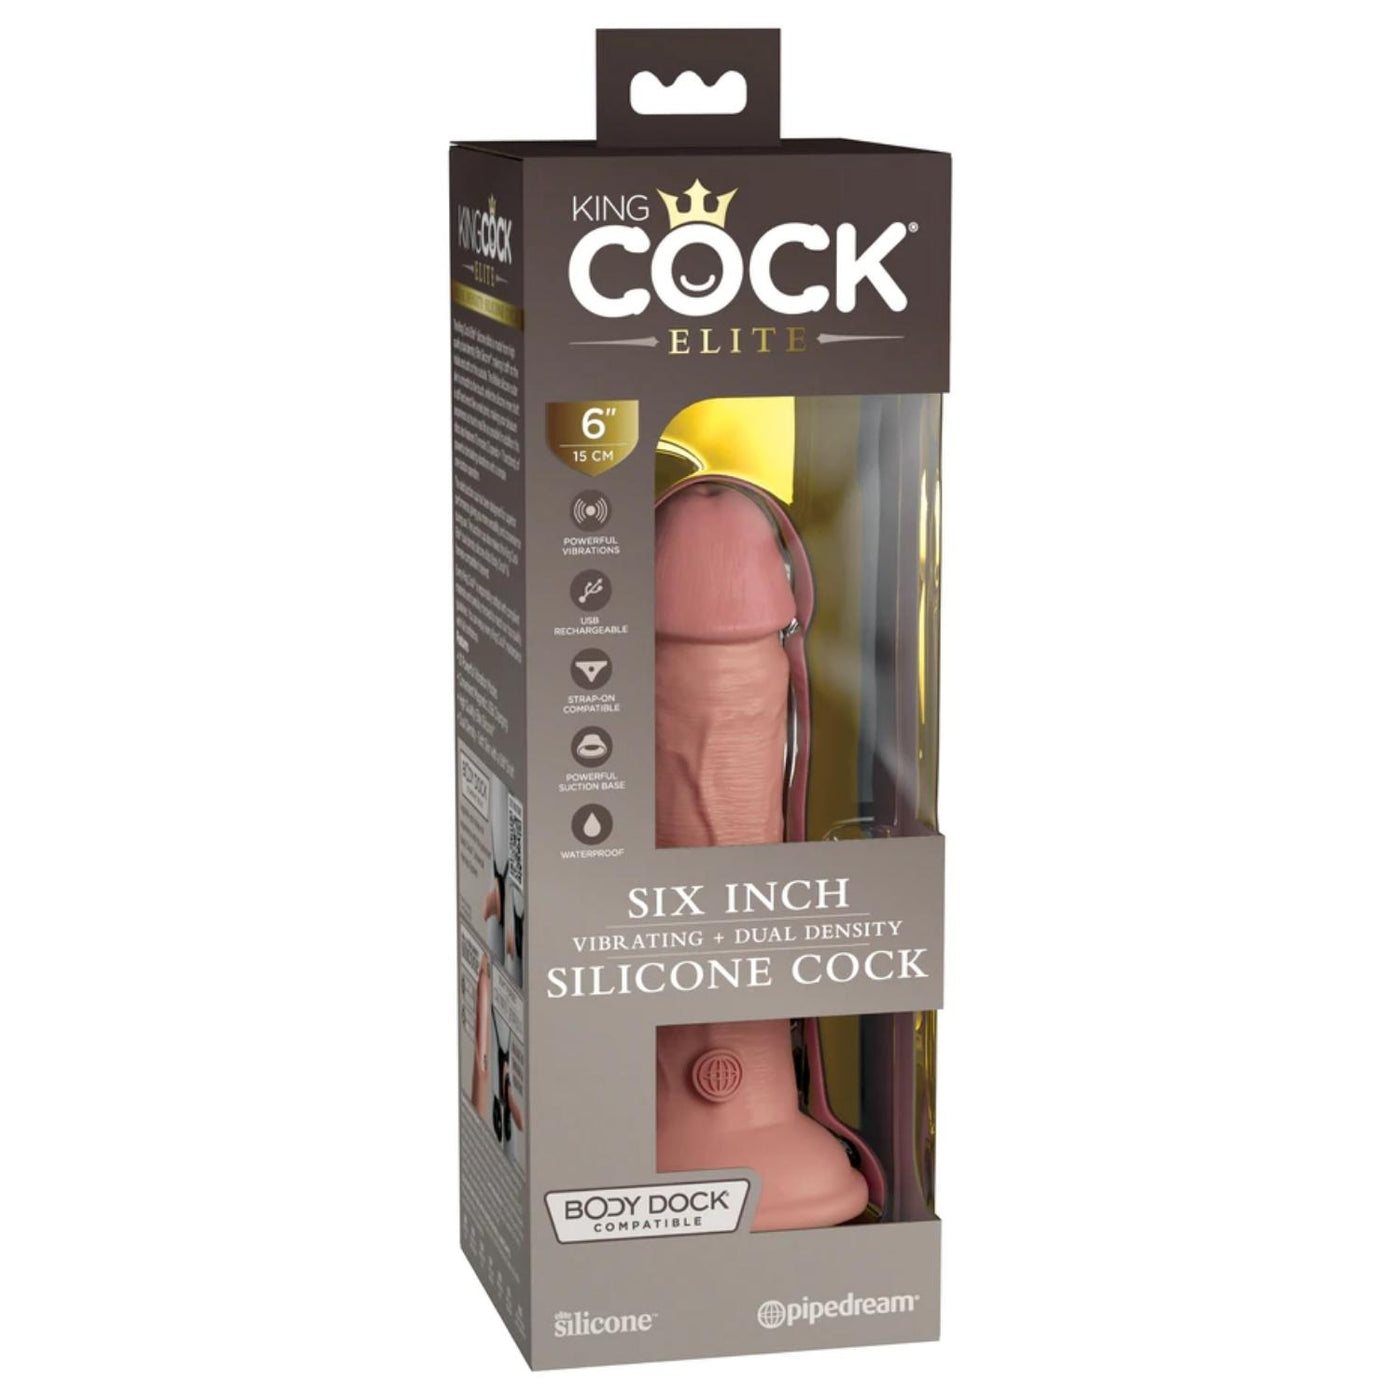 King Cock Elite Vibrating Silicone Dual-Density 6 Inch Cock photo